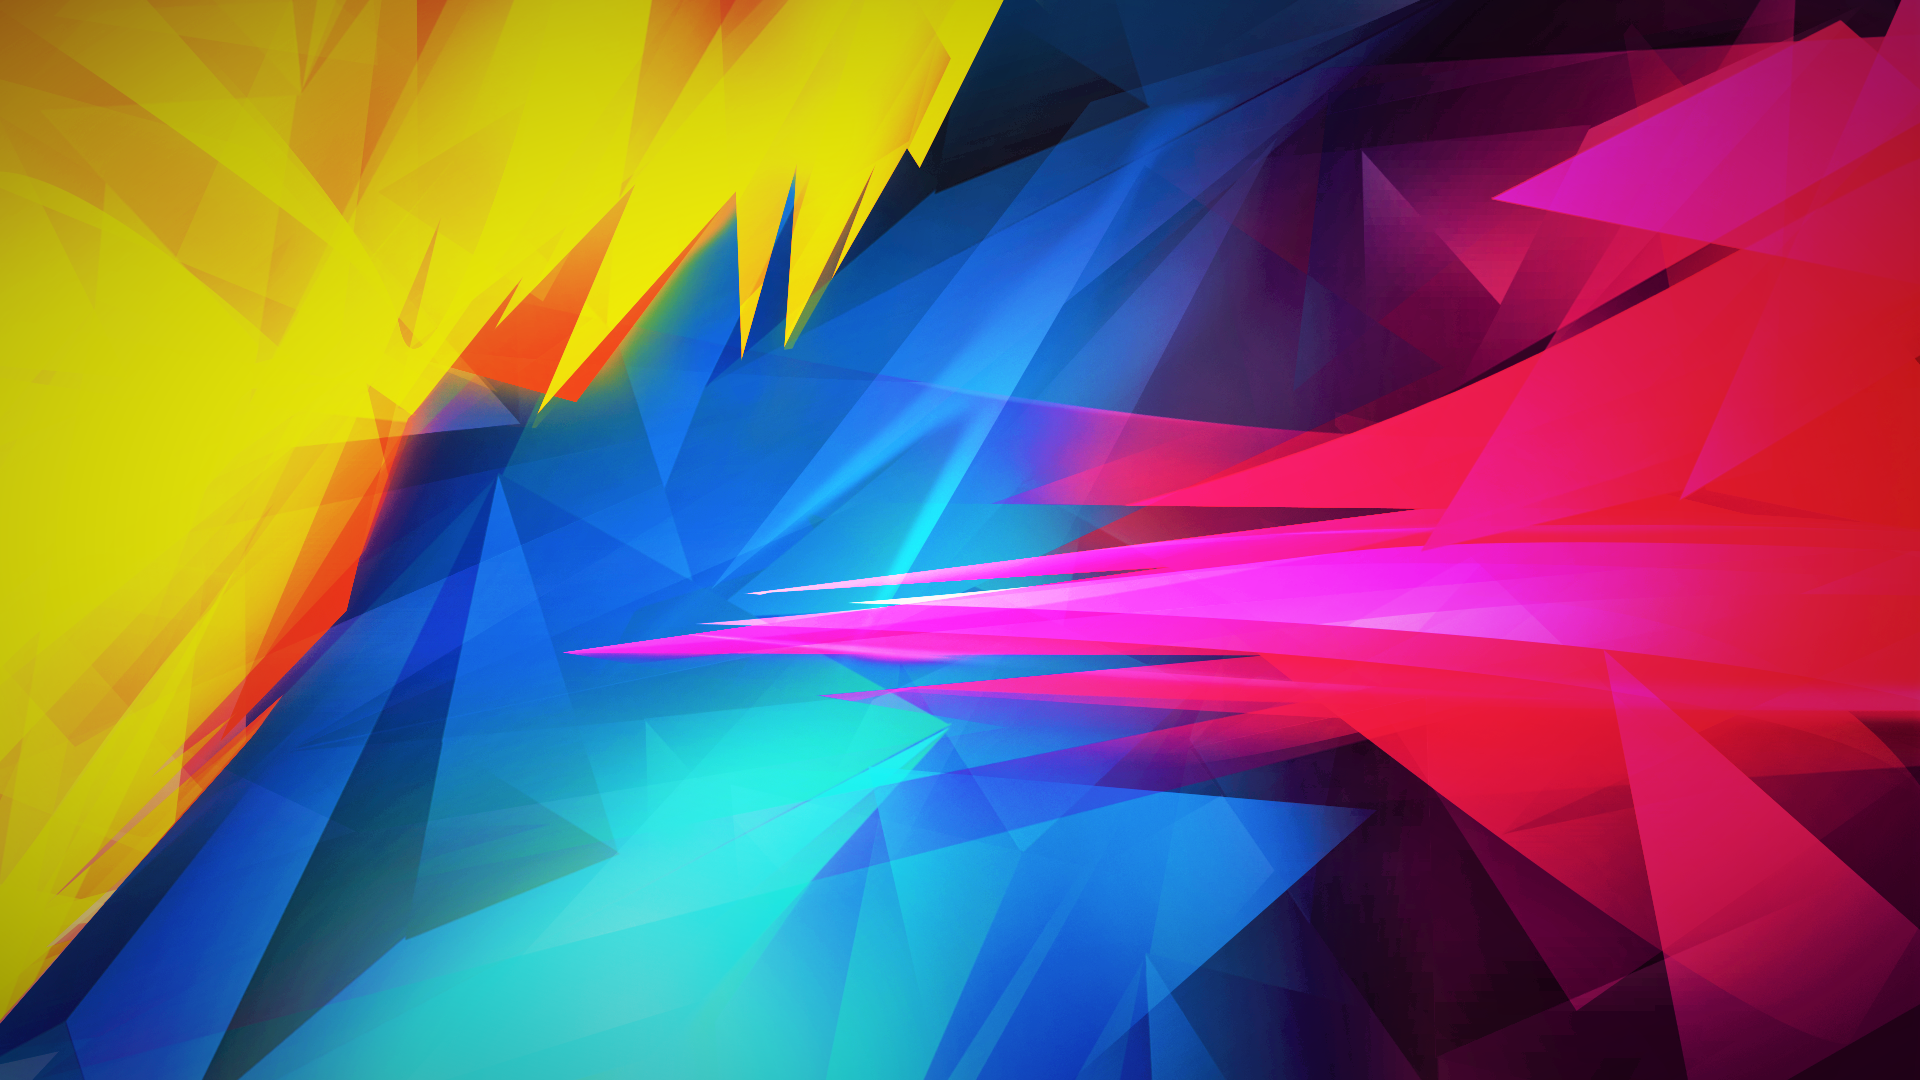 Abstract Blue Yellow Red Pink Purple Orange Colorful Cyan Magenta 1920x1080